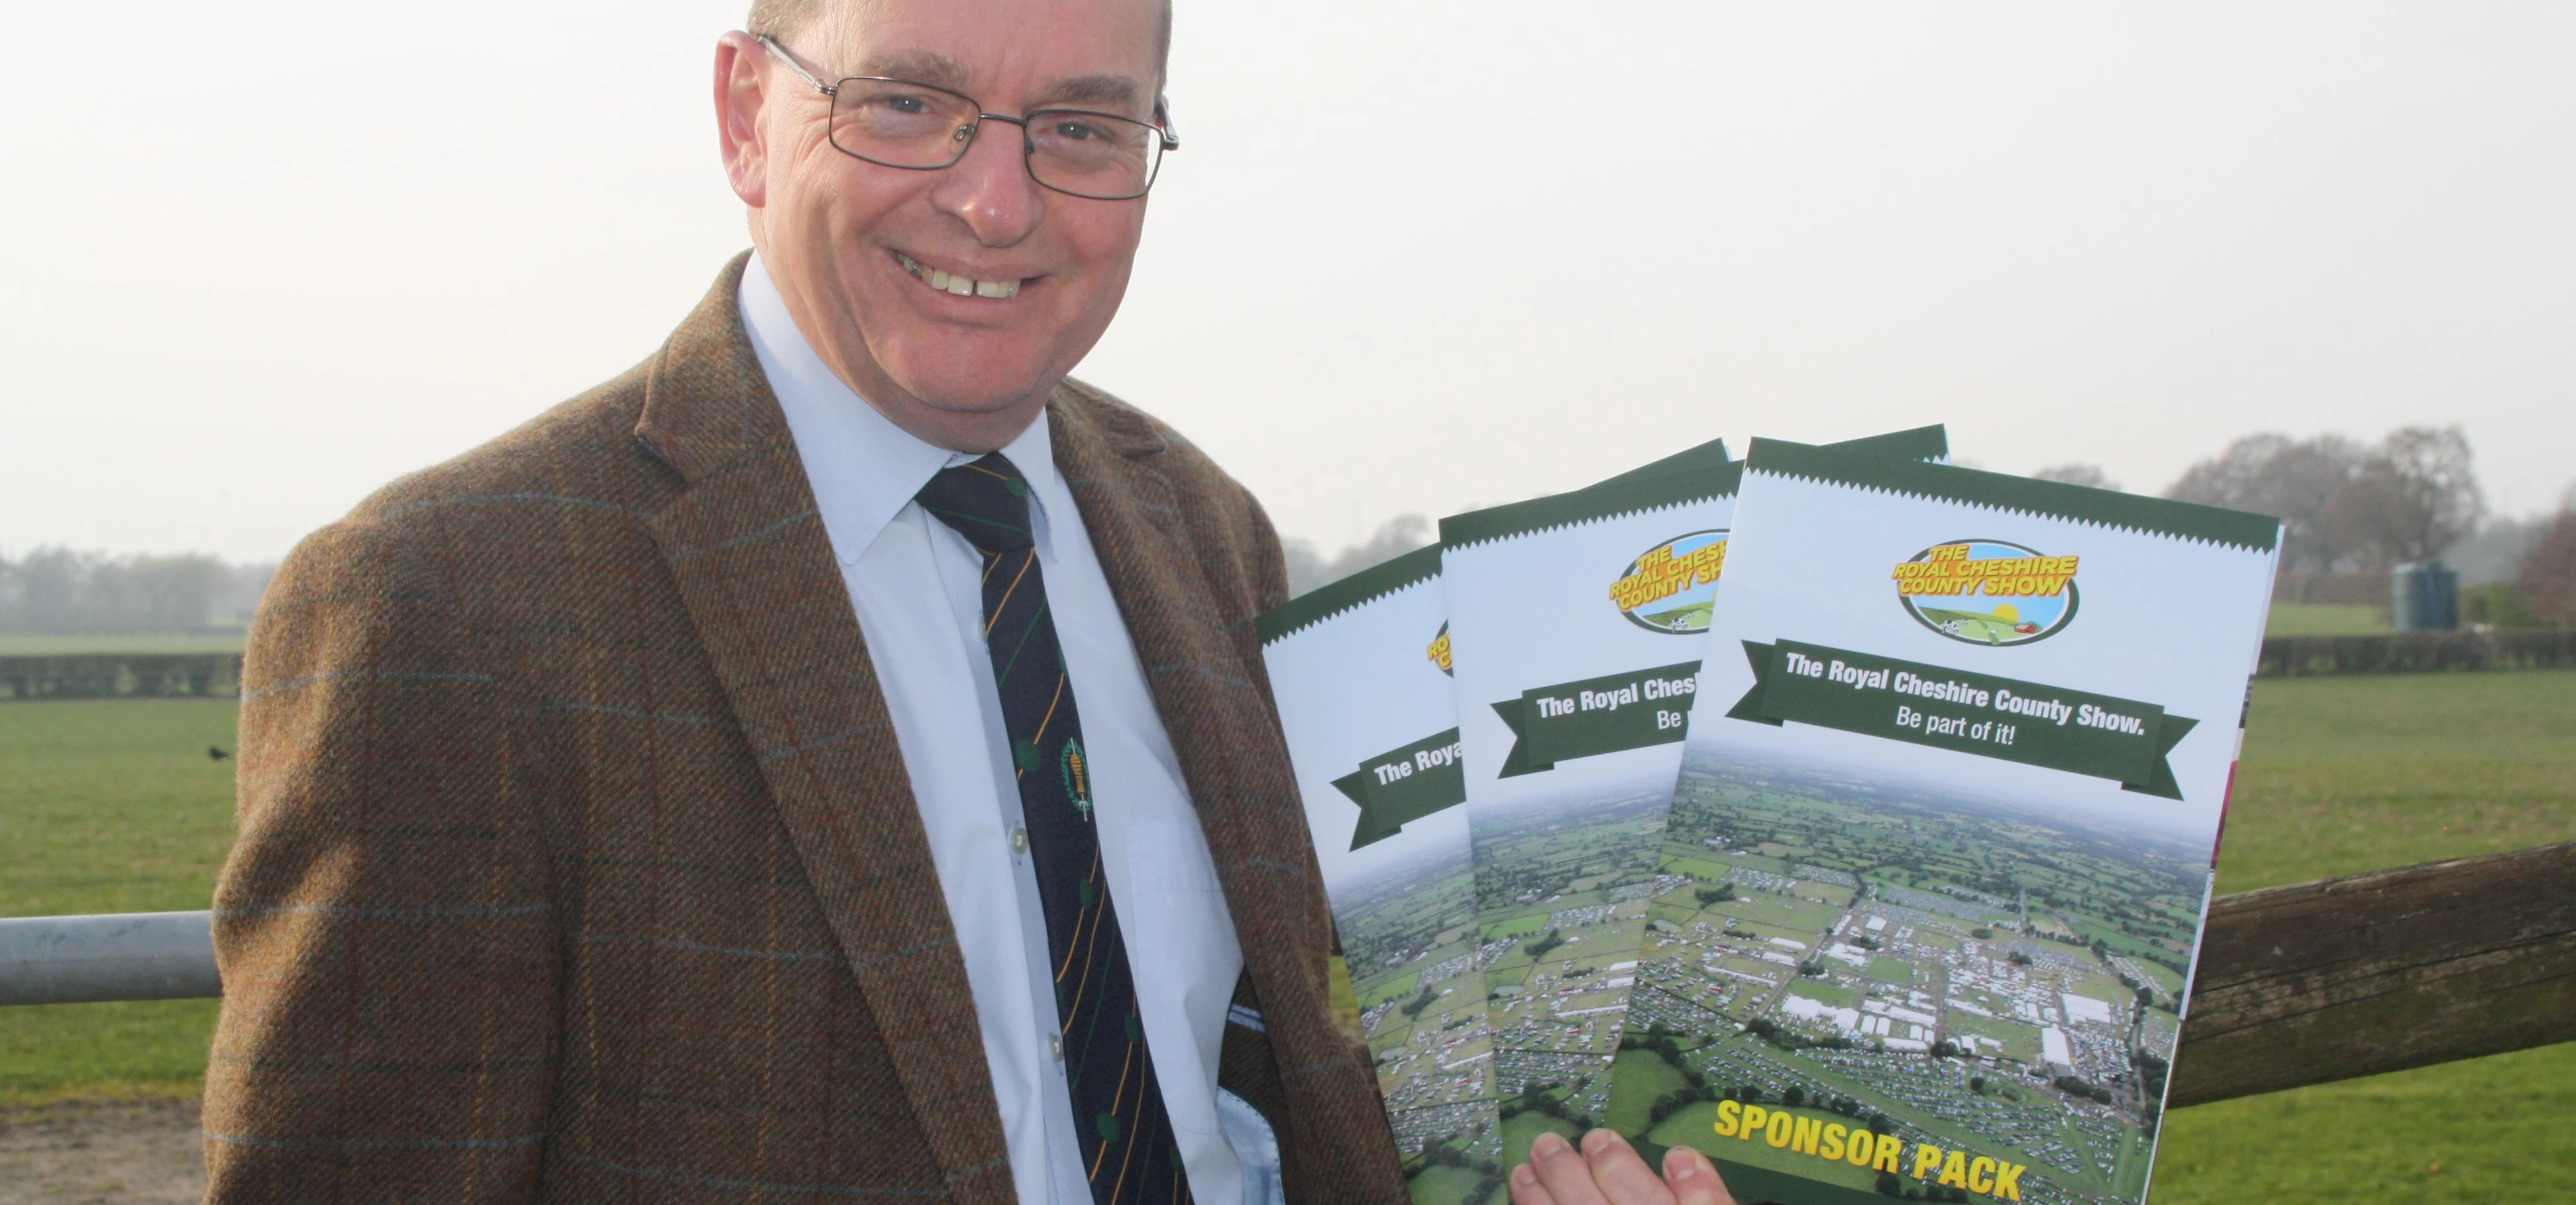 Nigel Evans – Executive Director - with the new sponsor pack